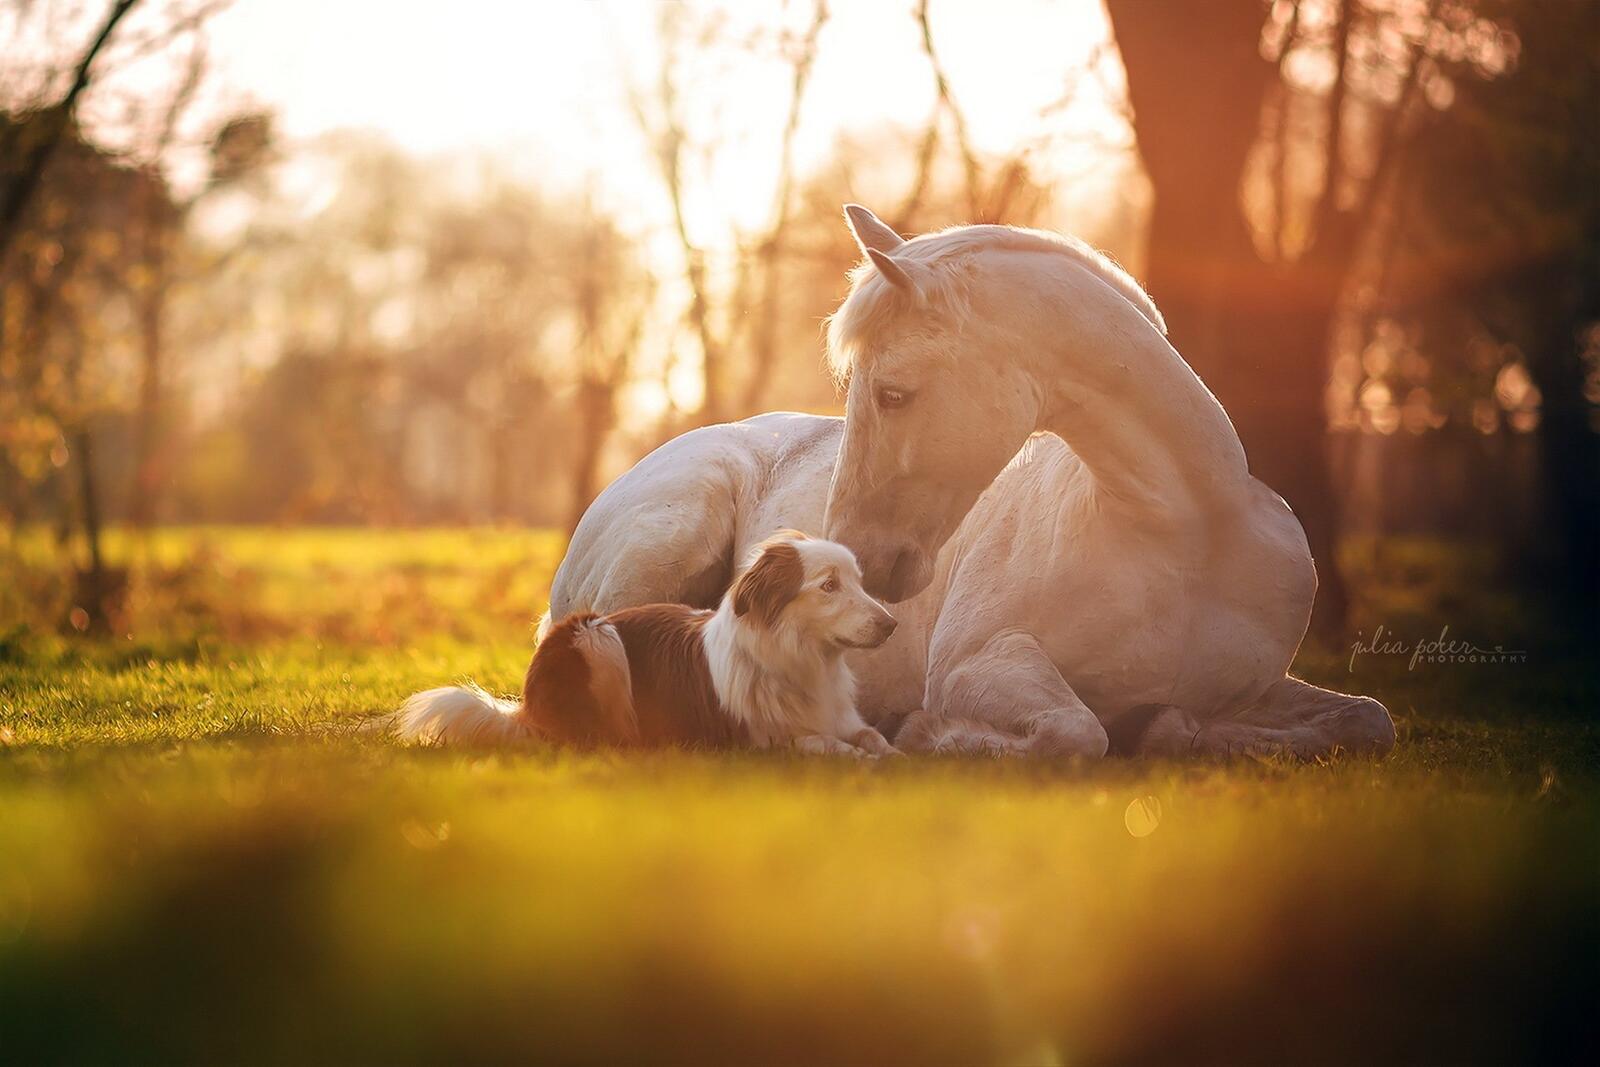 Free photo A white horse resting on the green grass with a dog